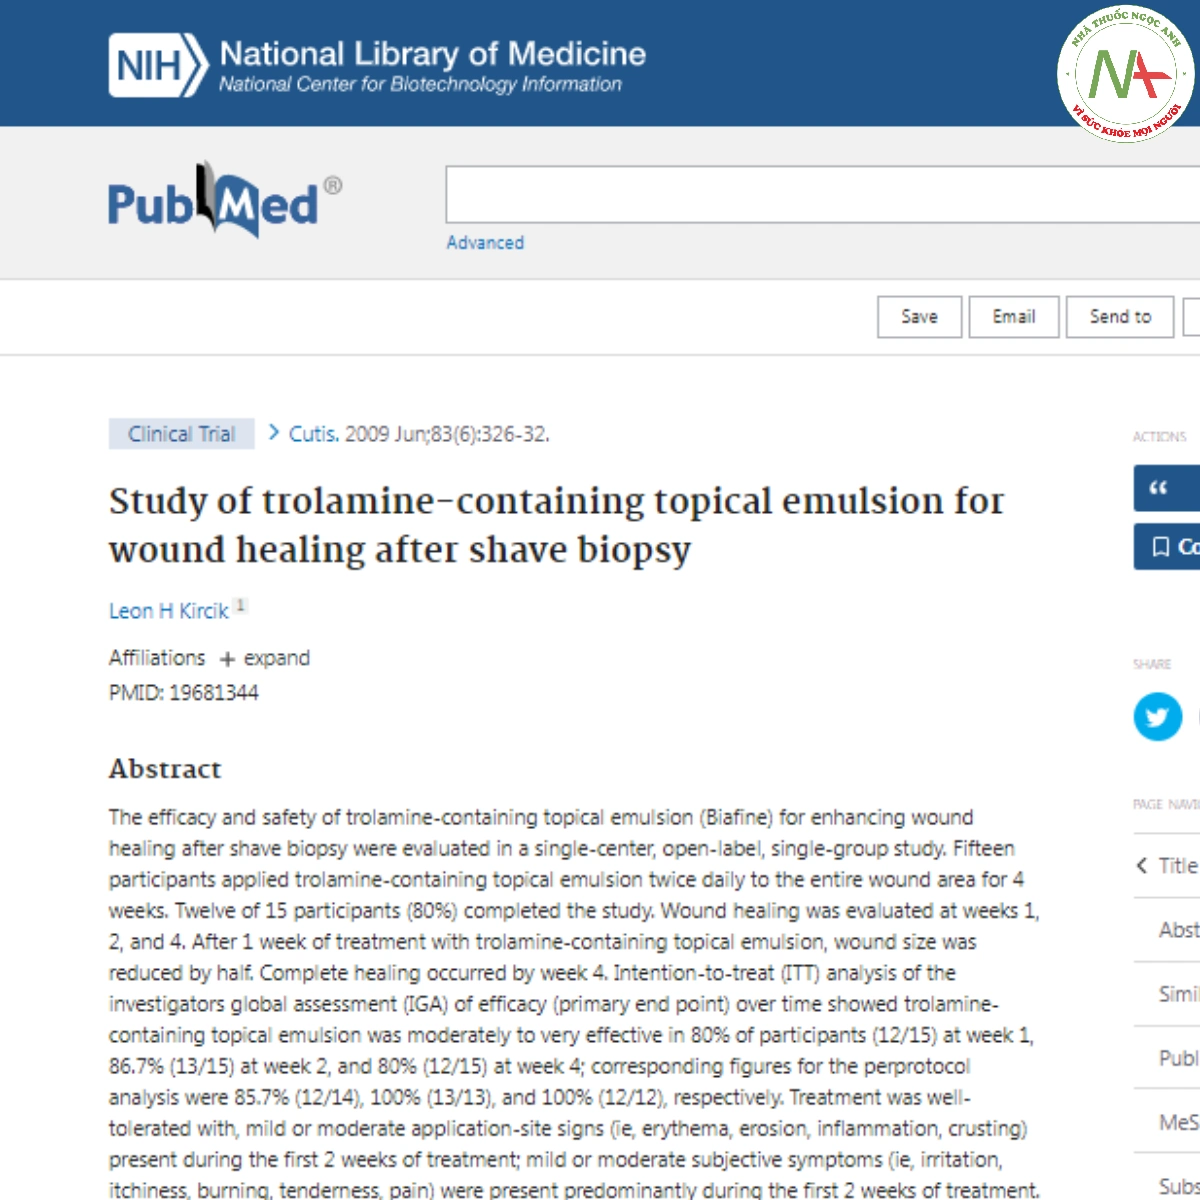 Study of trolamine-containing topical emulsion for wound healing after shave biopsy